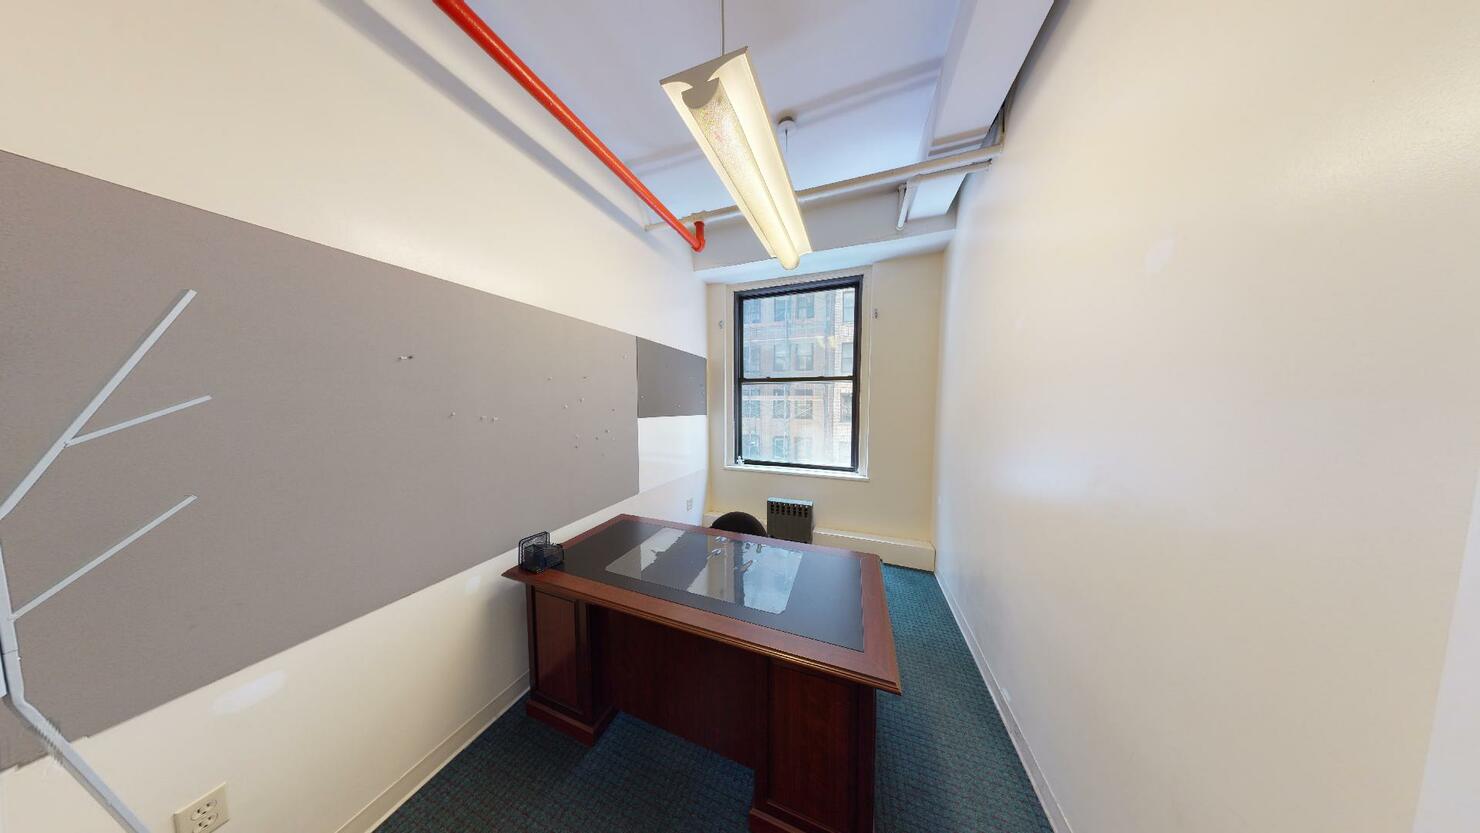 247 West 35th Street Office Space - Small Private Office with Large Window